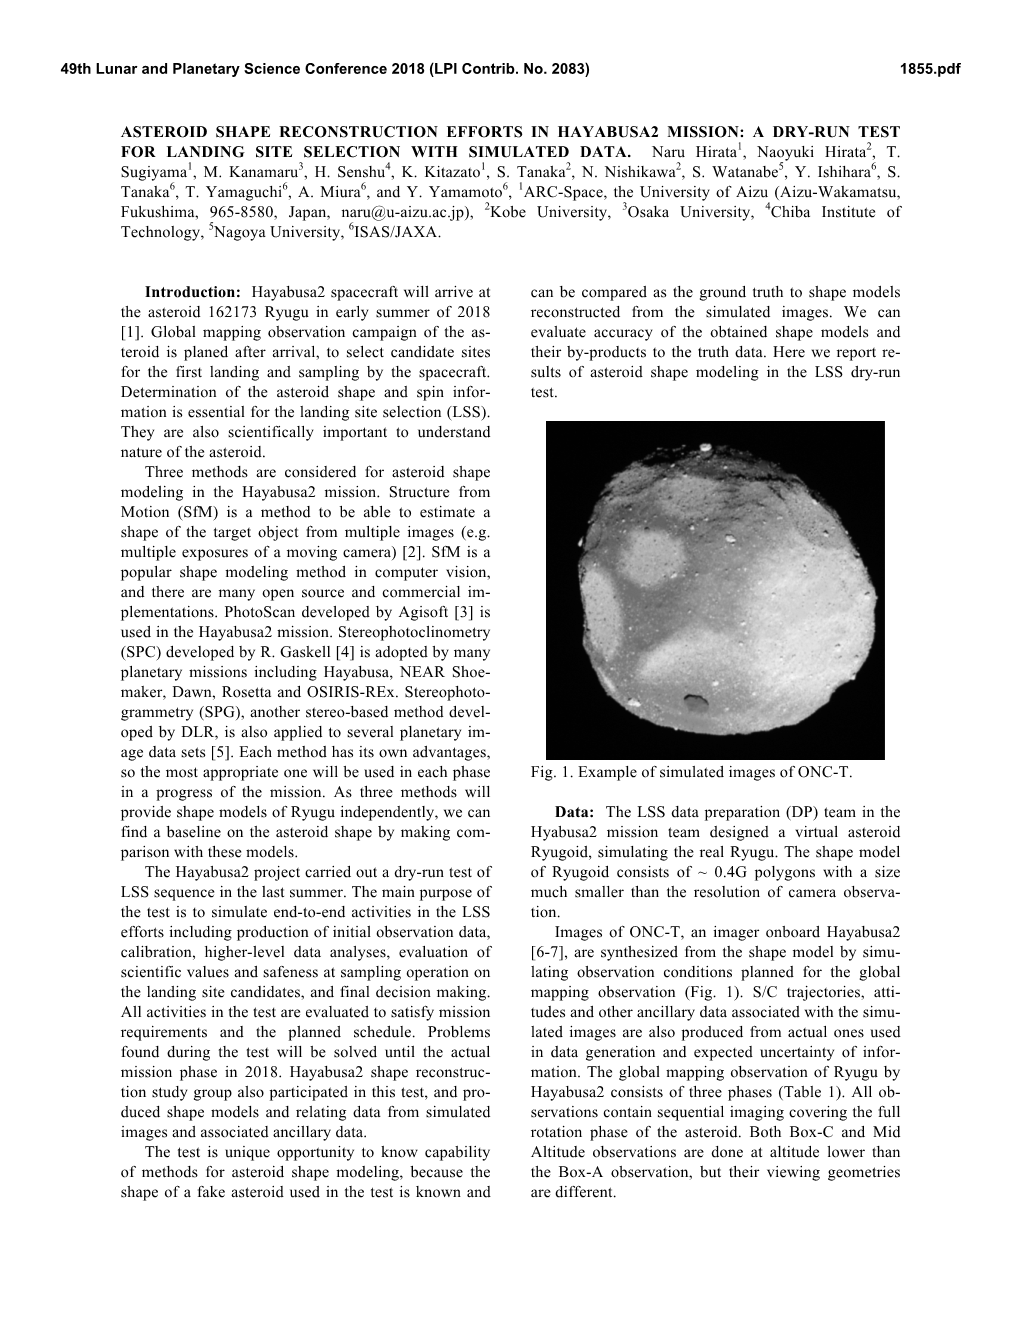 ASTEROID SHAPE RECONSTRUCTION EFFORTS in HAYABUSA2 MISSION: a DRY-RUN TEST for LANDING SITE SELECTION with SIMULATED DATA. Naru Hirata1, Naoyuki Hirata2, T